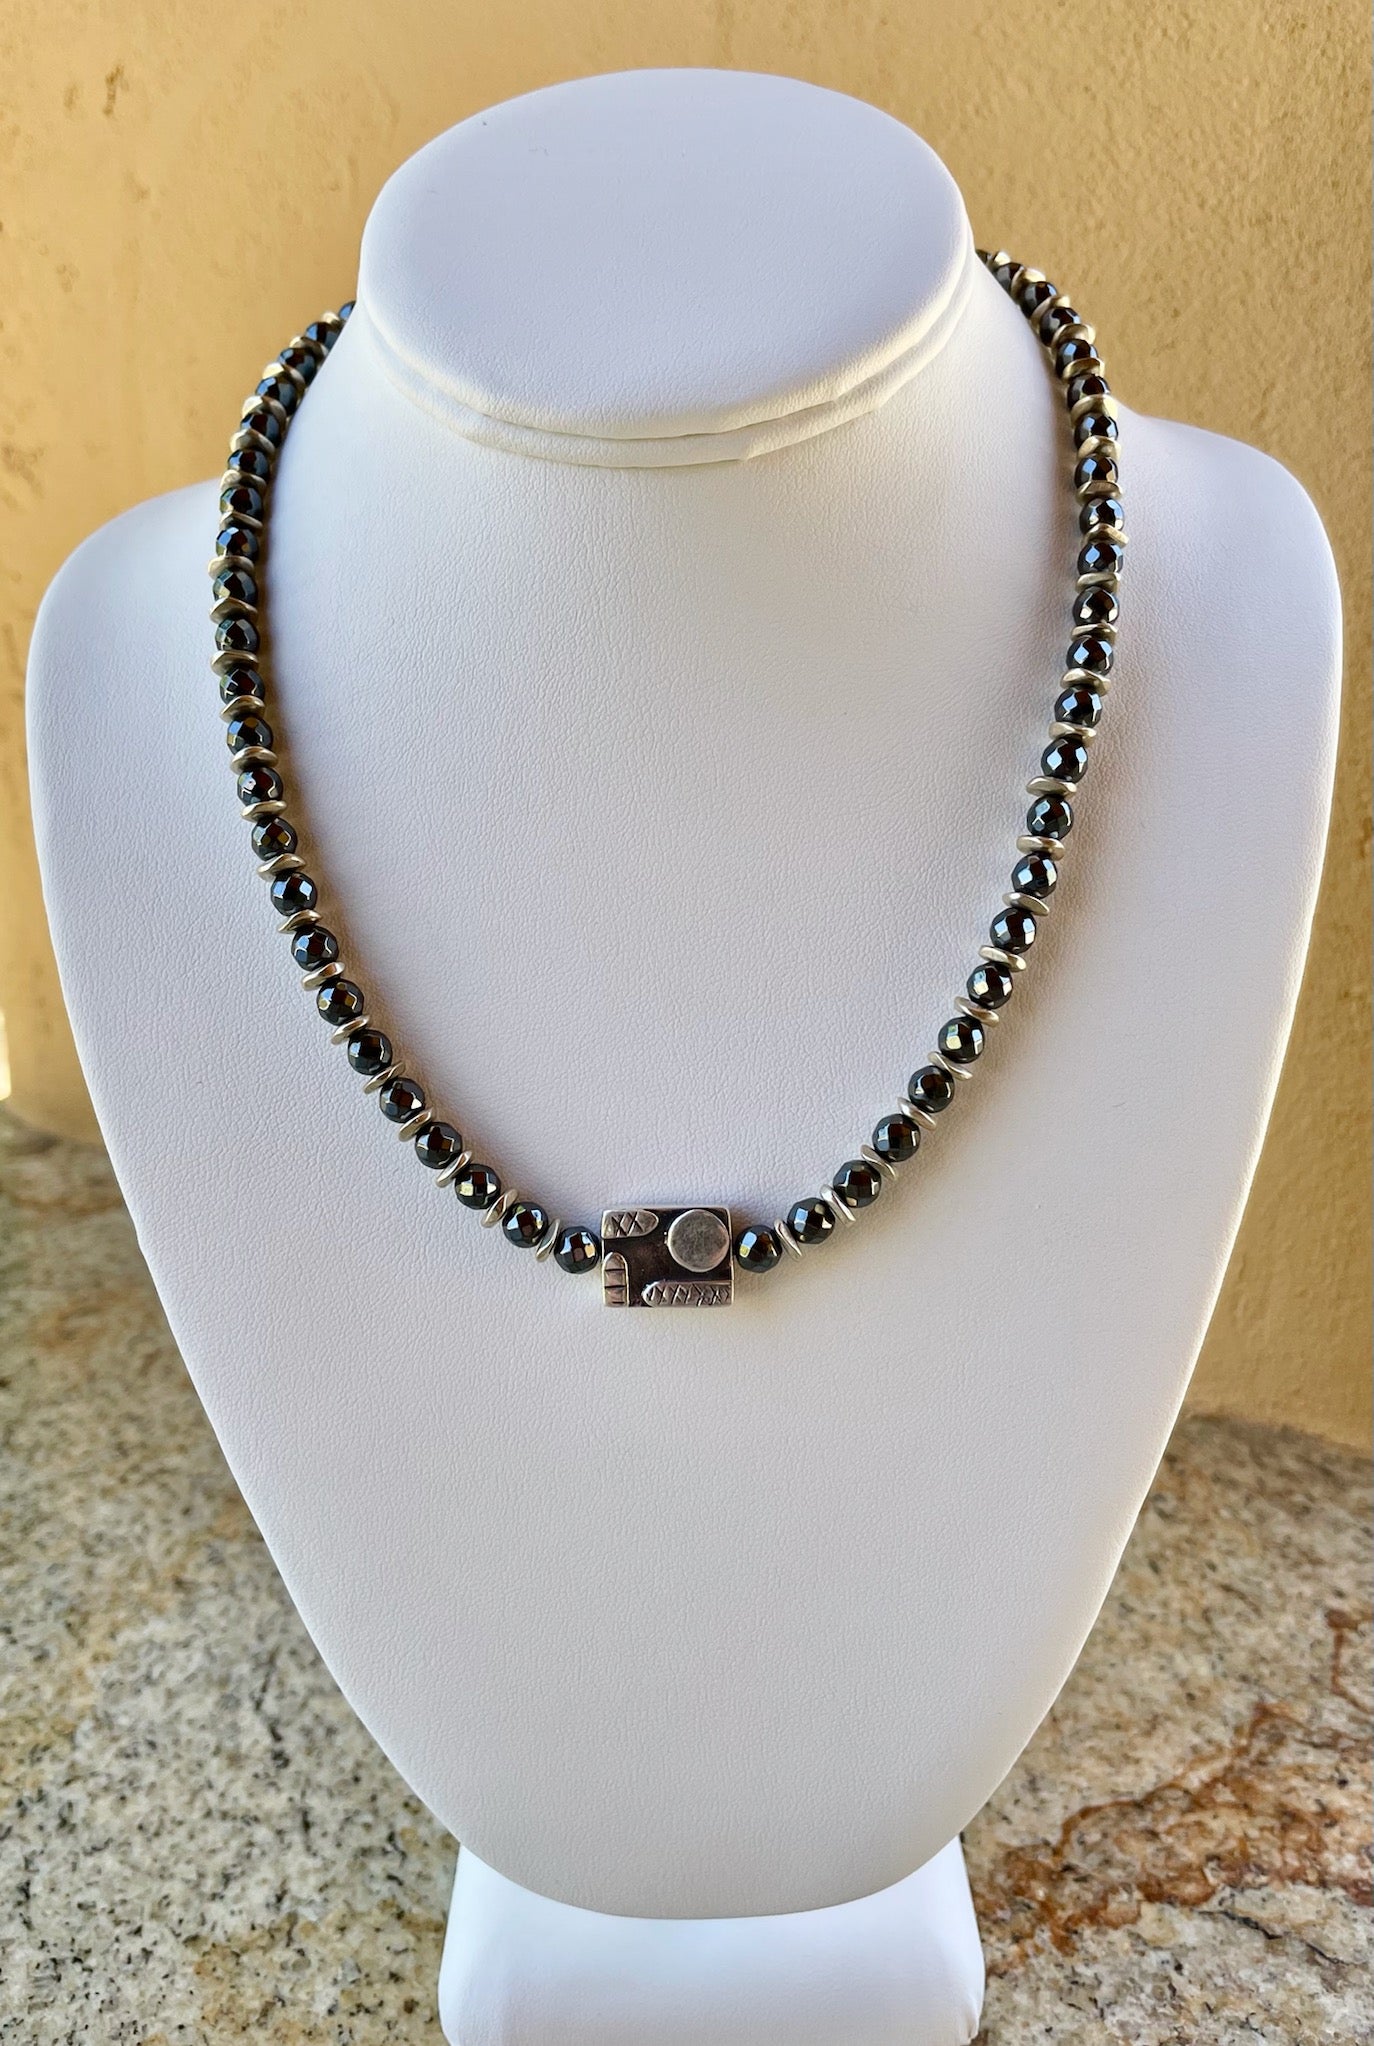 Necklace - Hematite with silver spacers